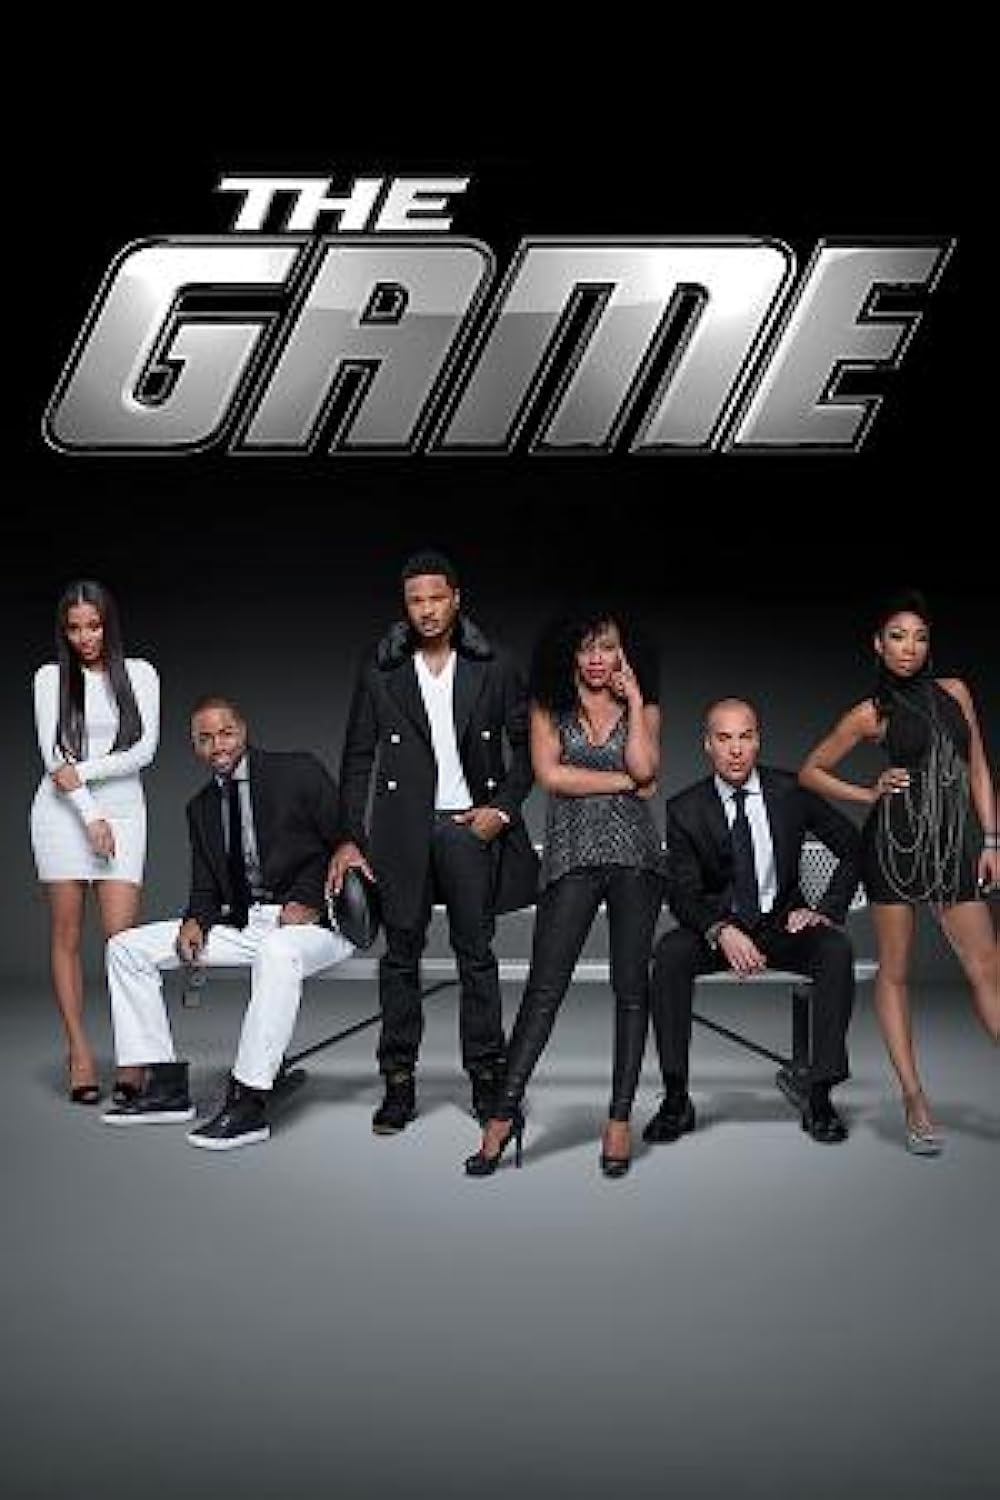 The Game poster